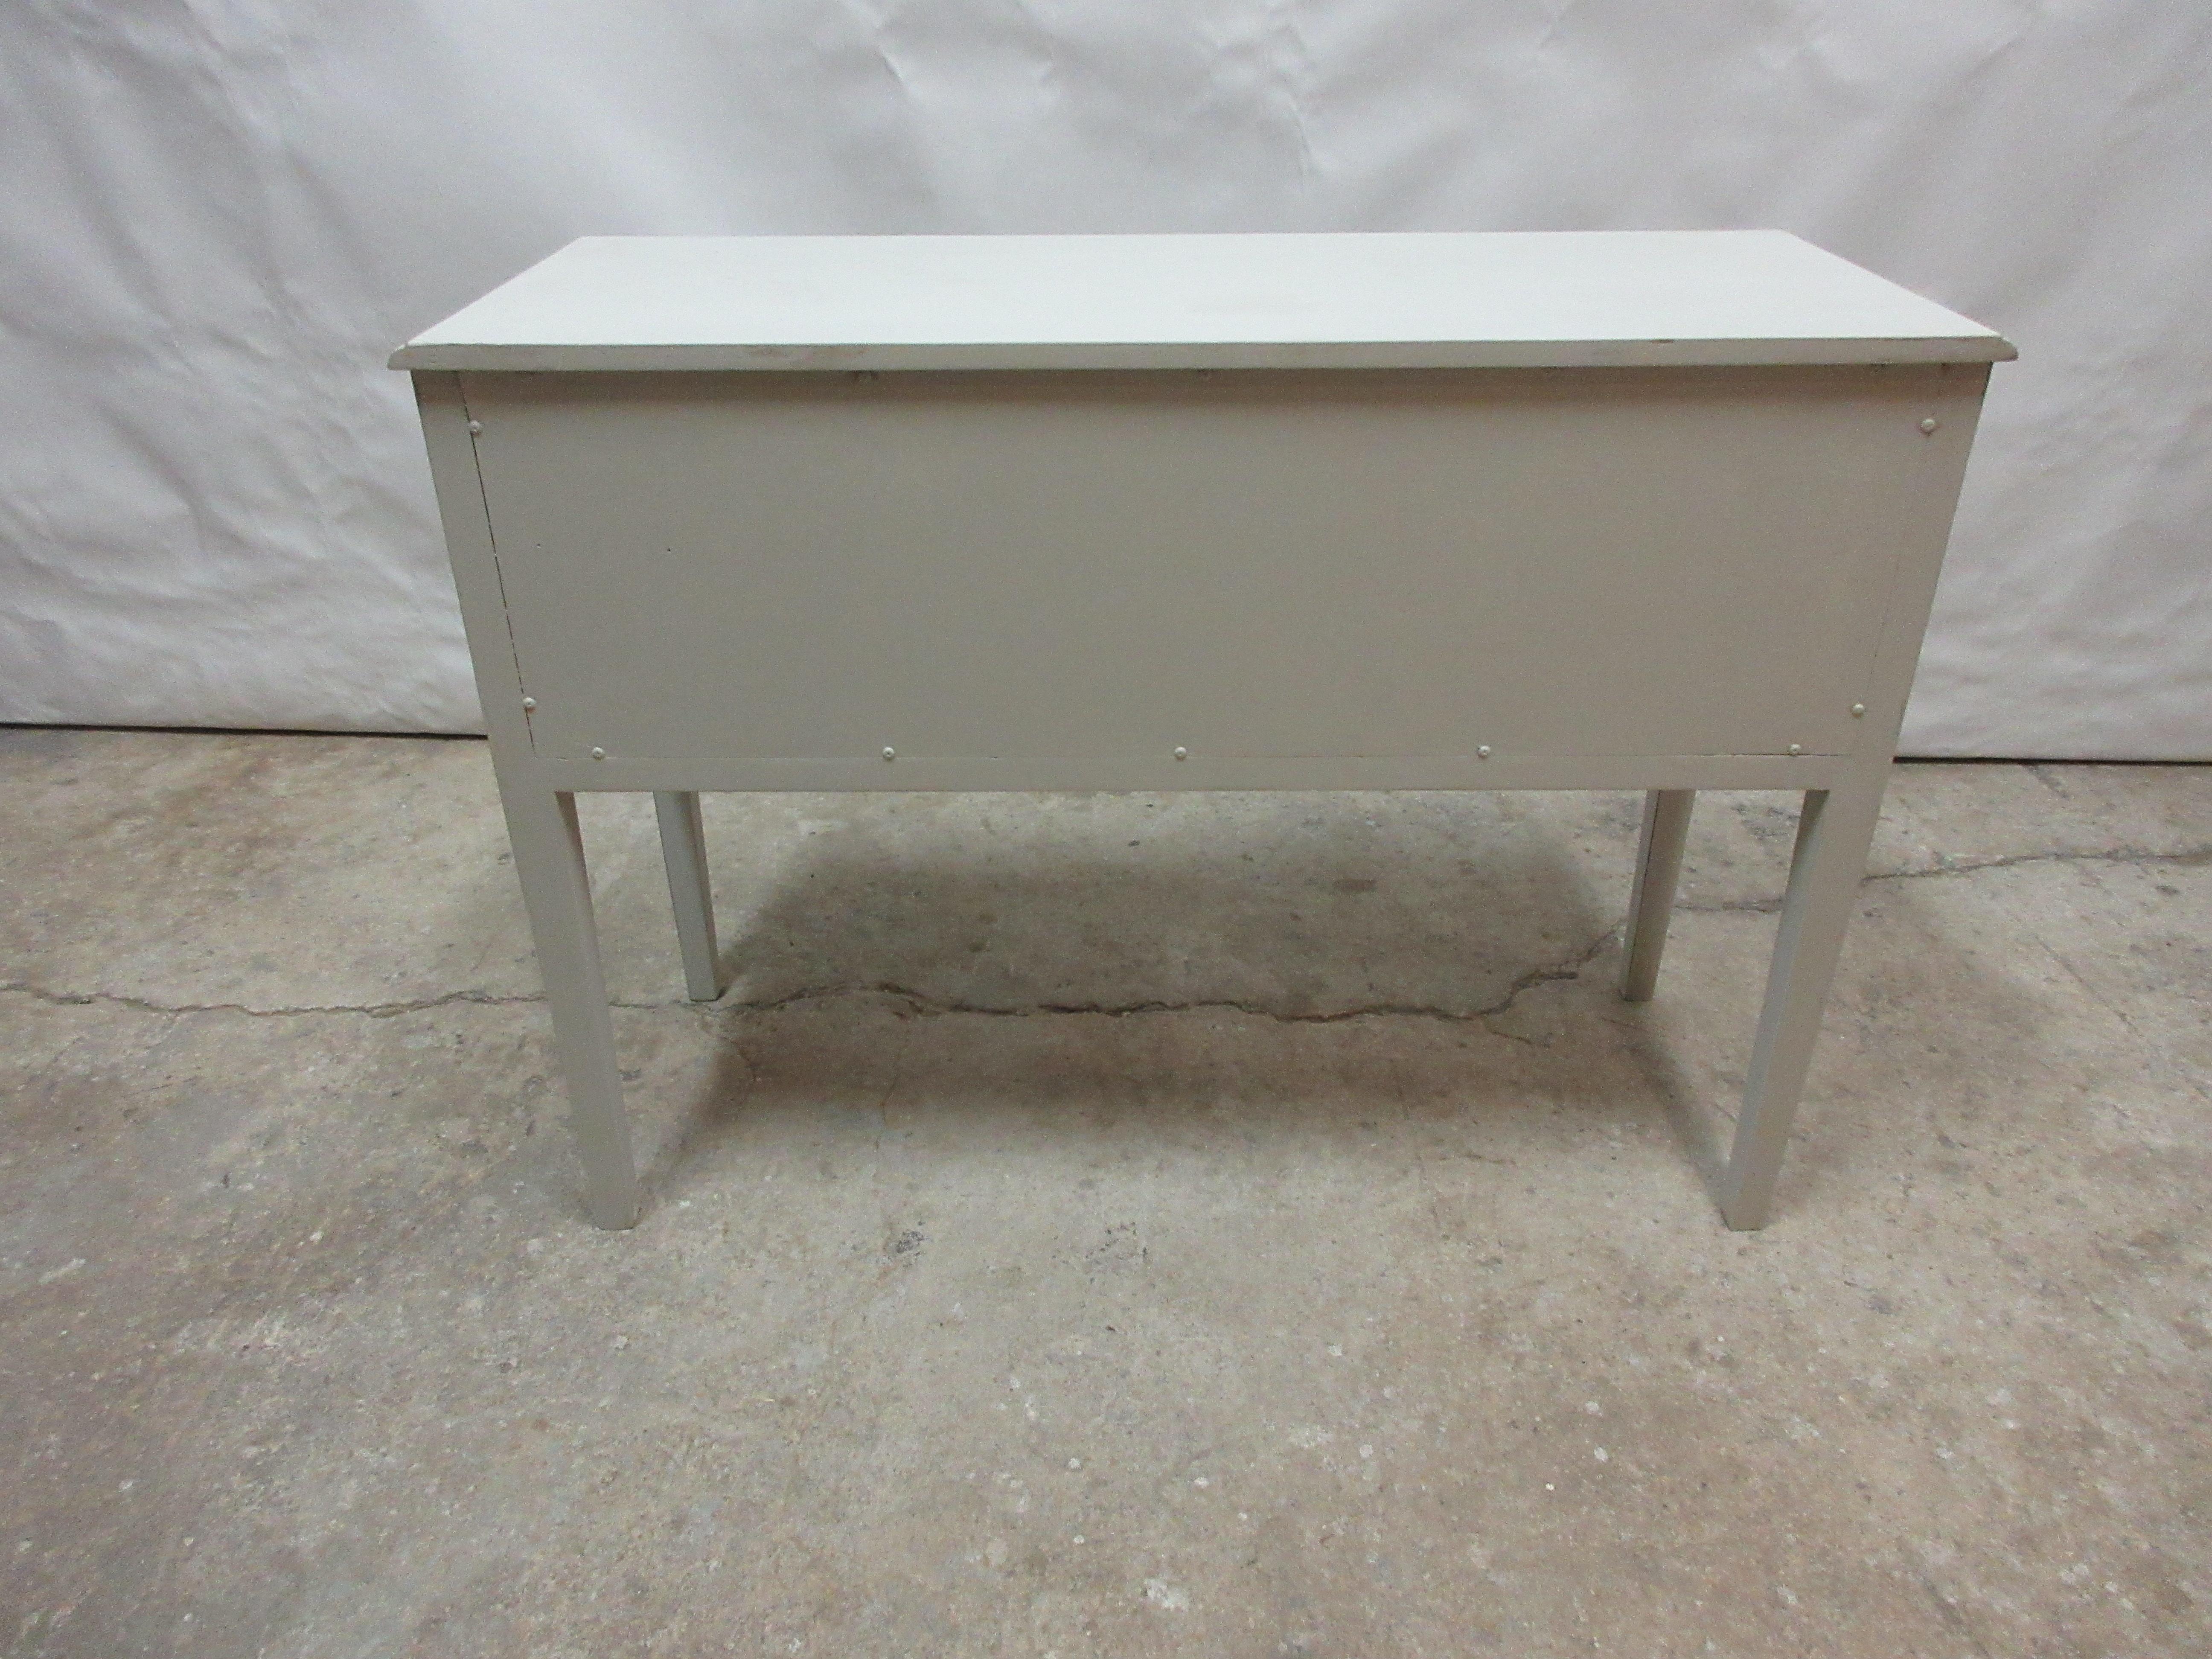 6 inch console table